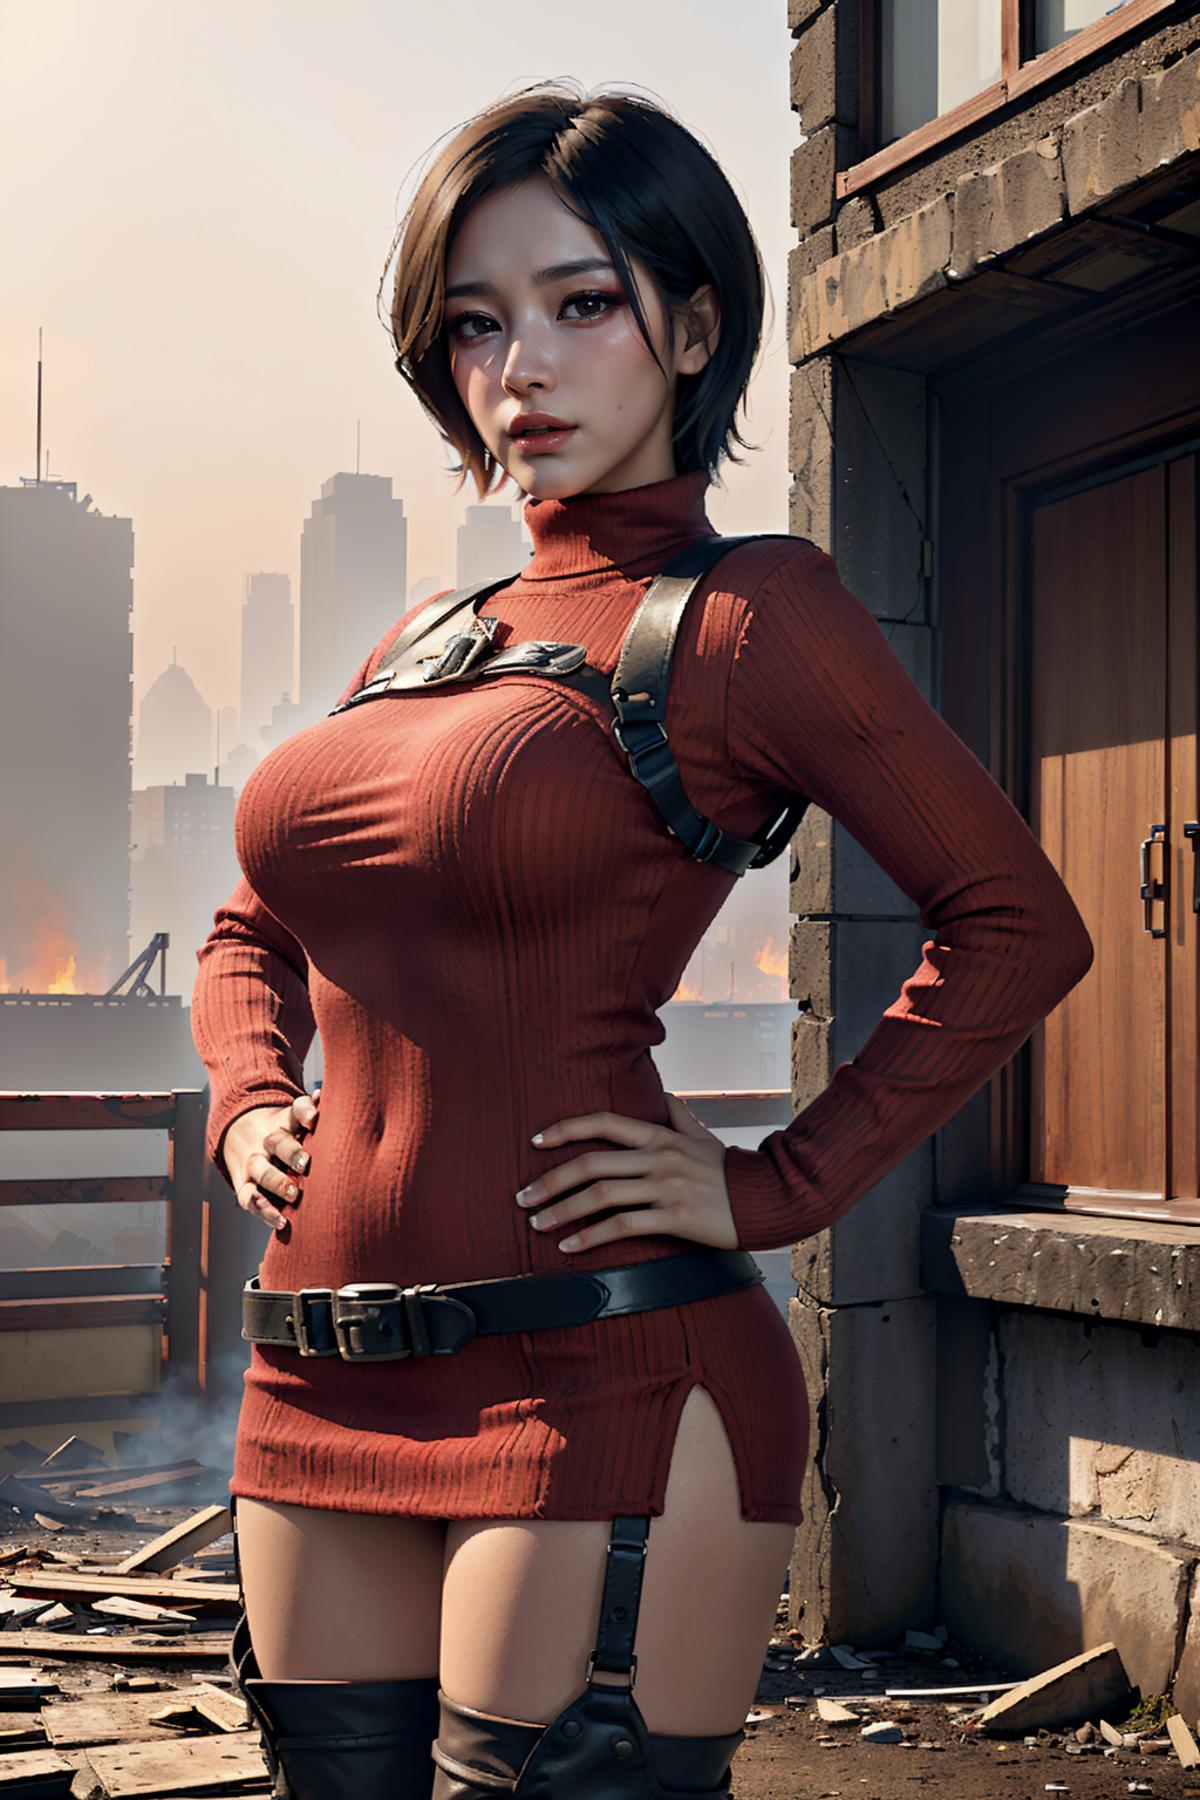 Ada Wong from Resident Evil image by Darknoice